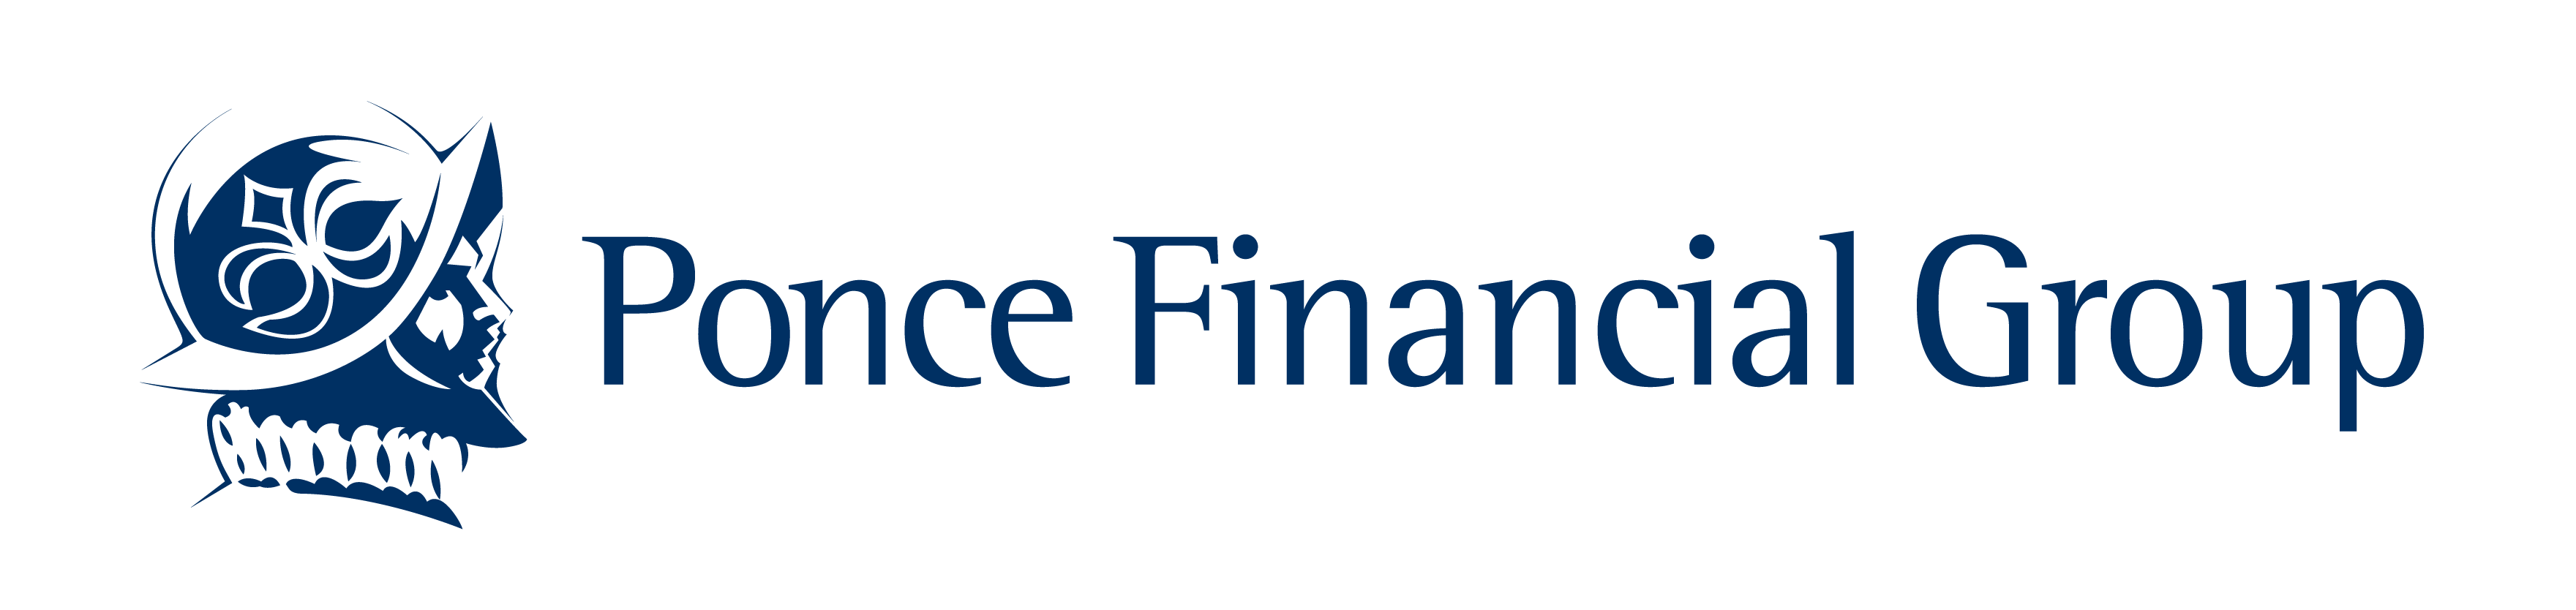 Ponce_Financial_Group_Logo.png